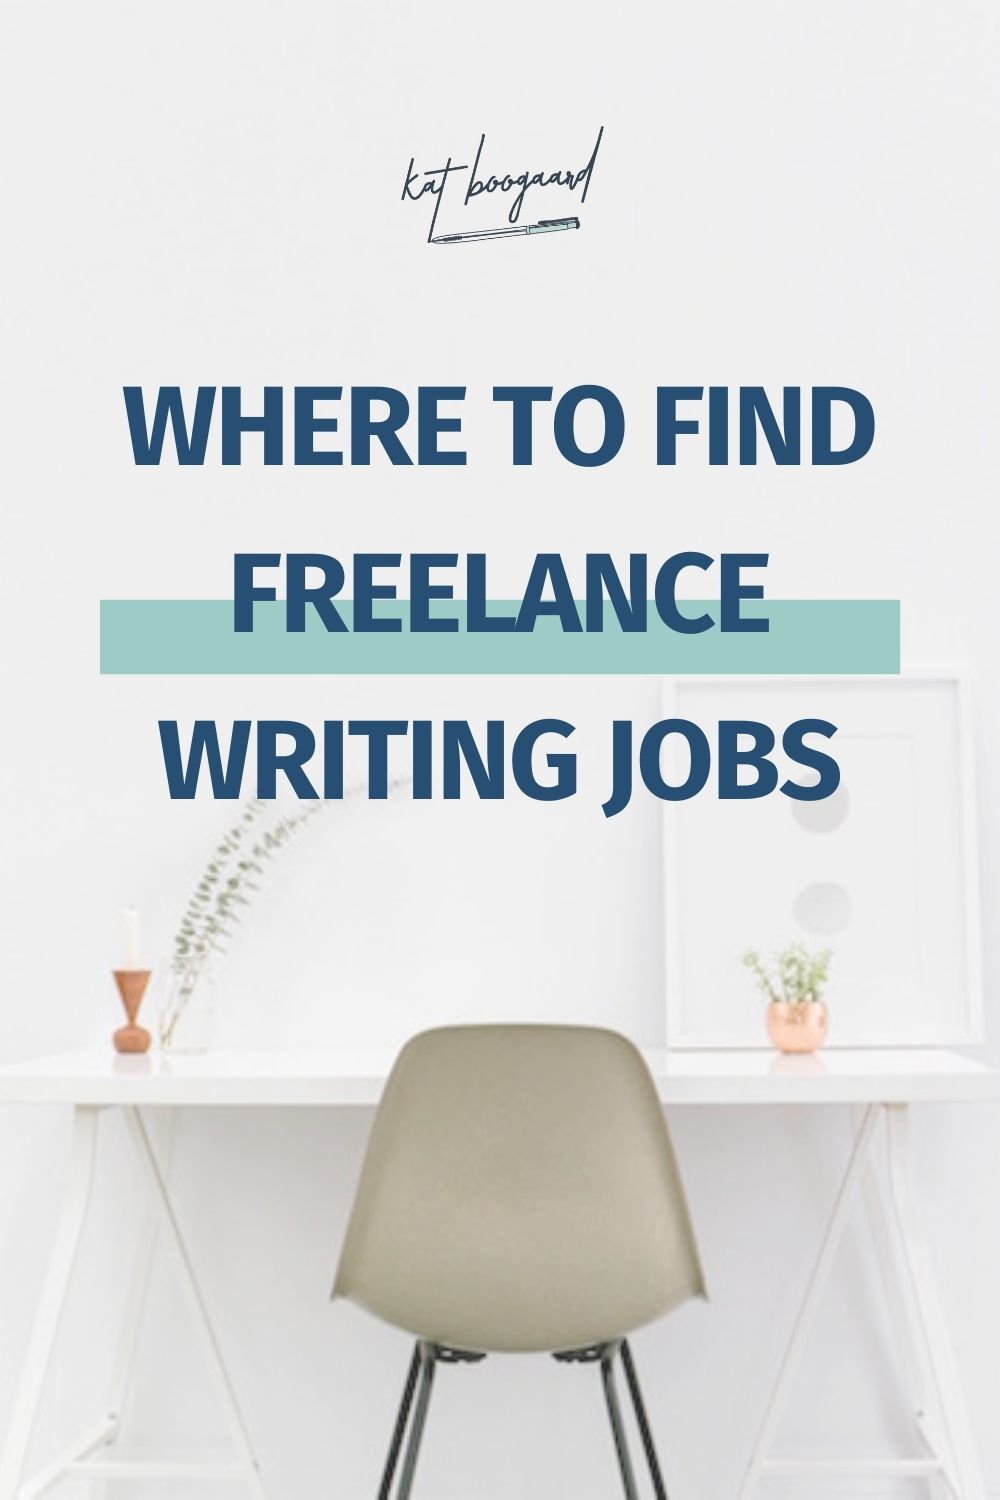 Where to find freelance writing jobs 3